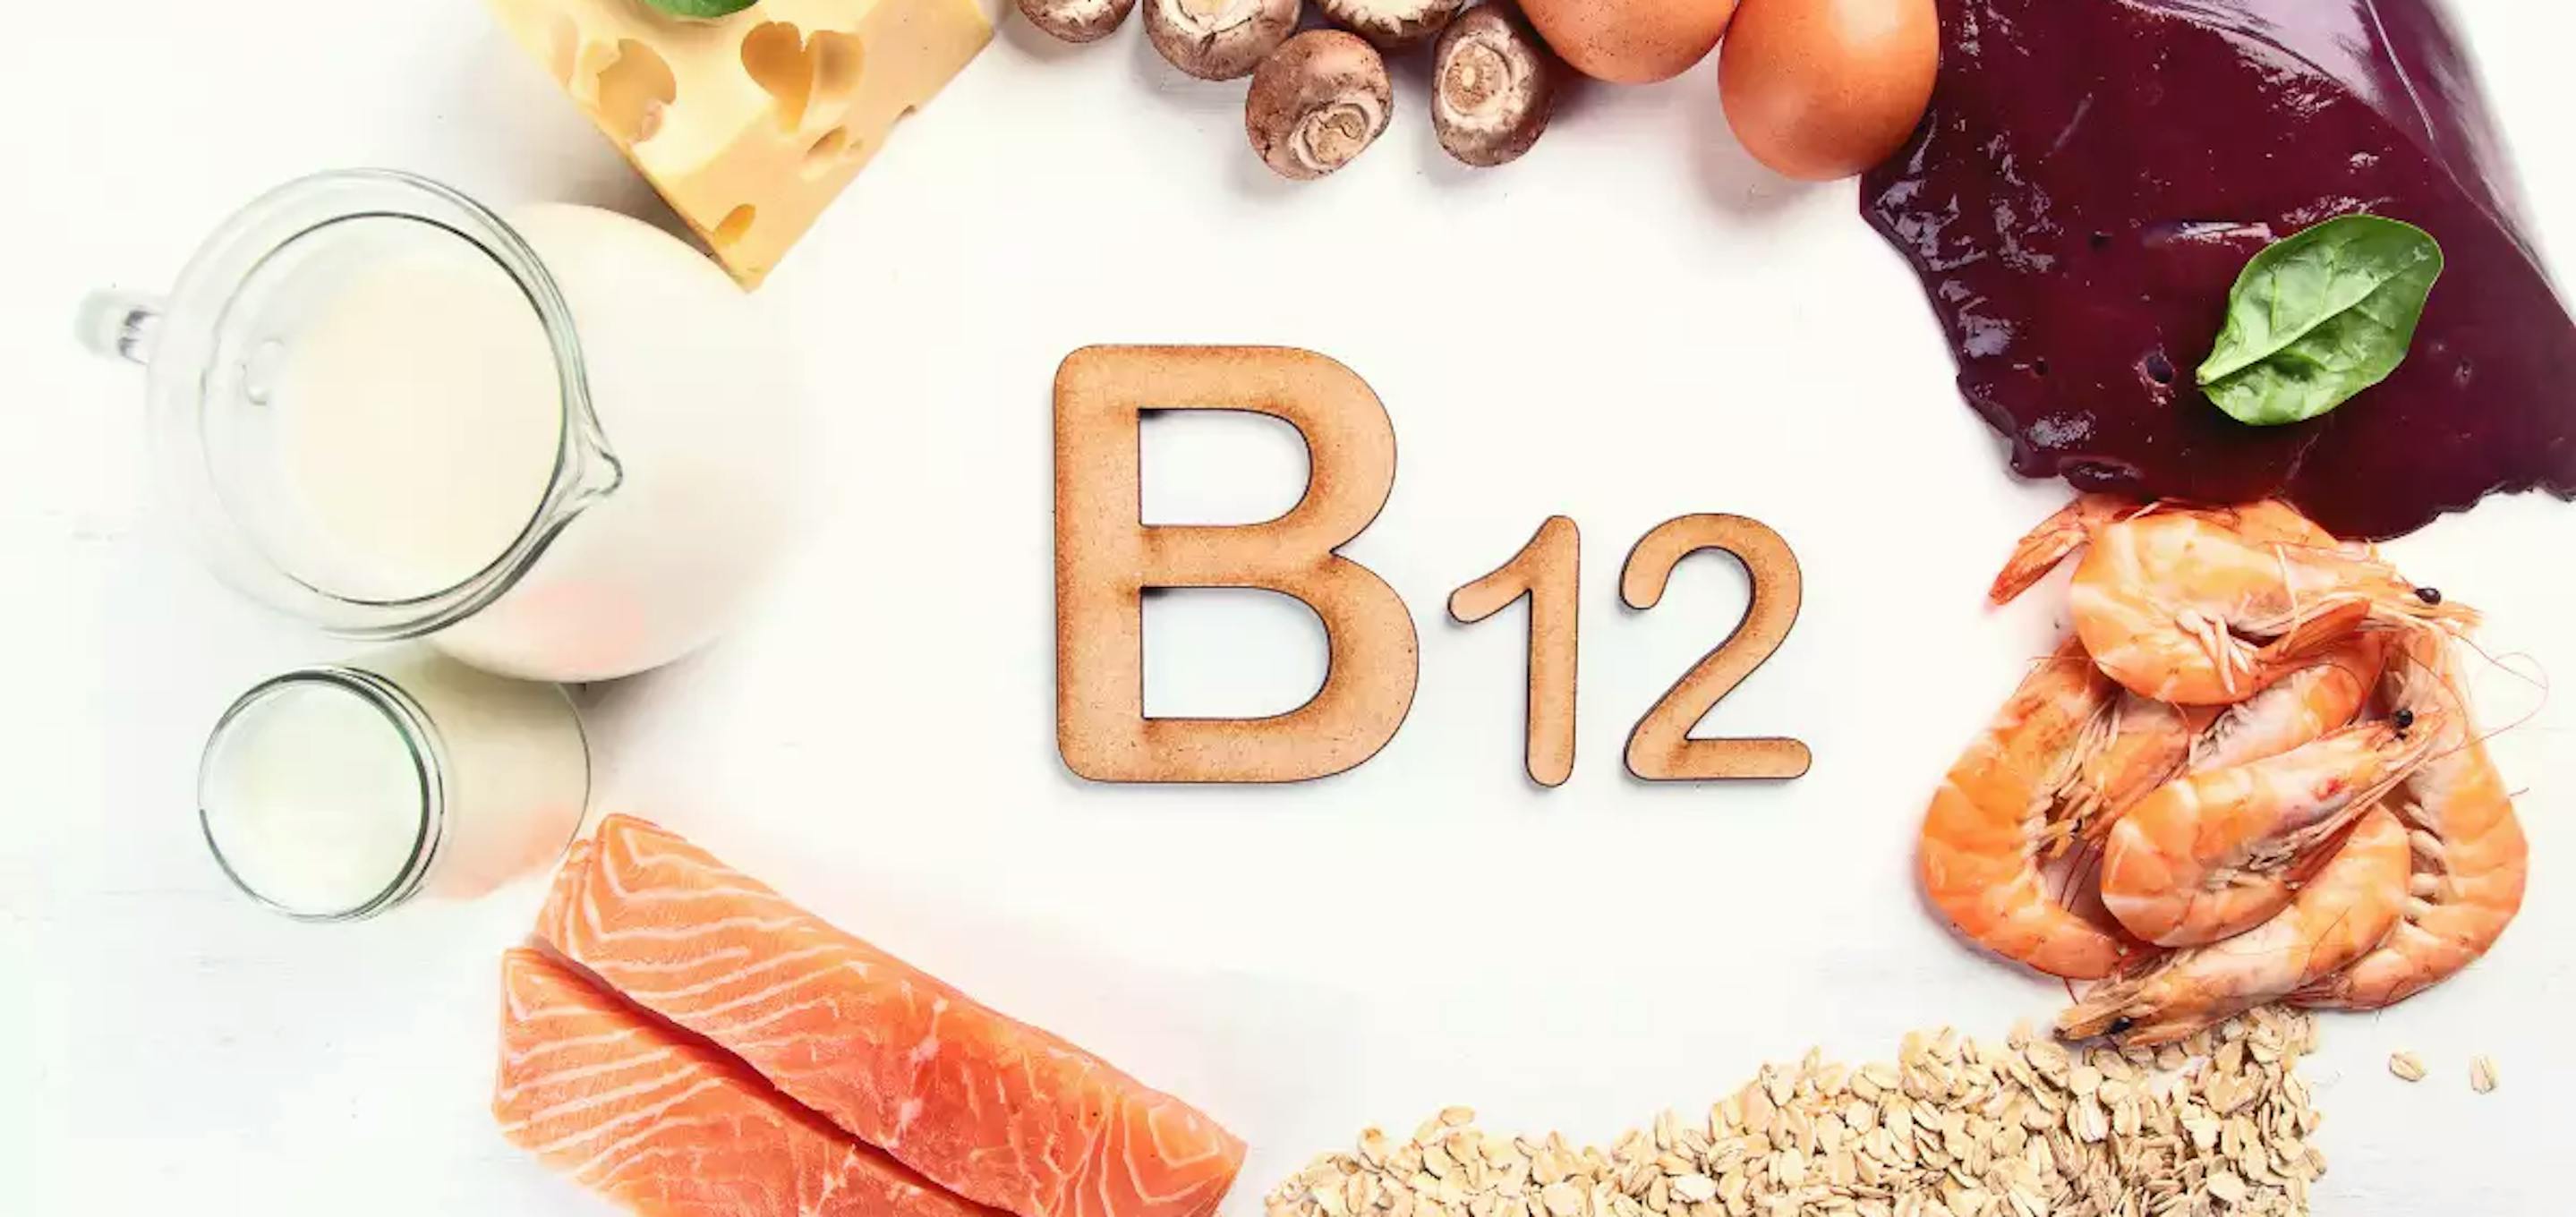 B12 title surrounding by food